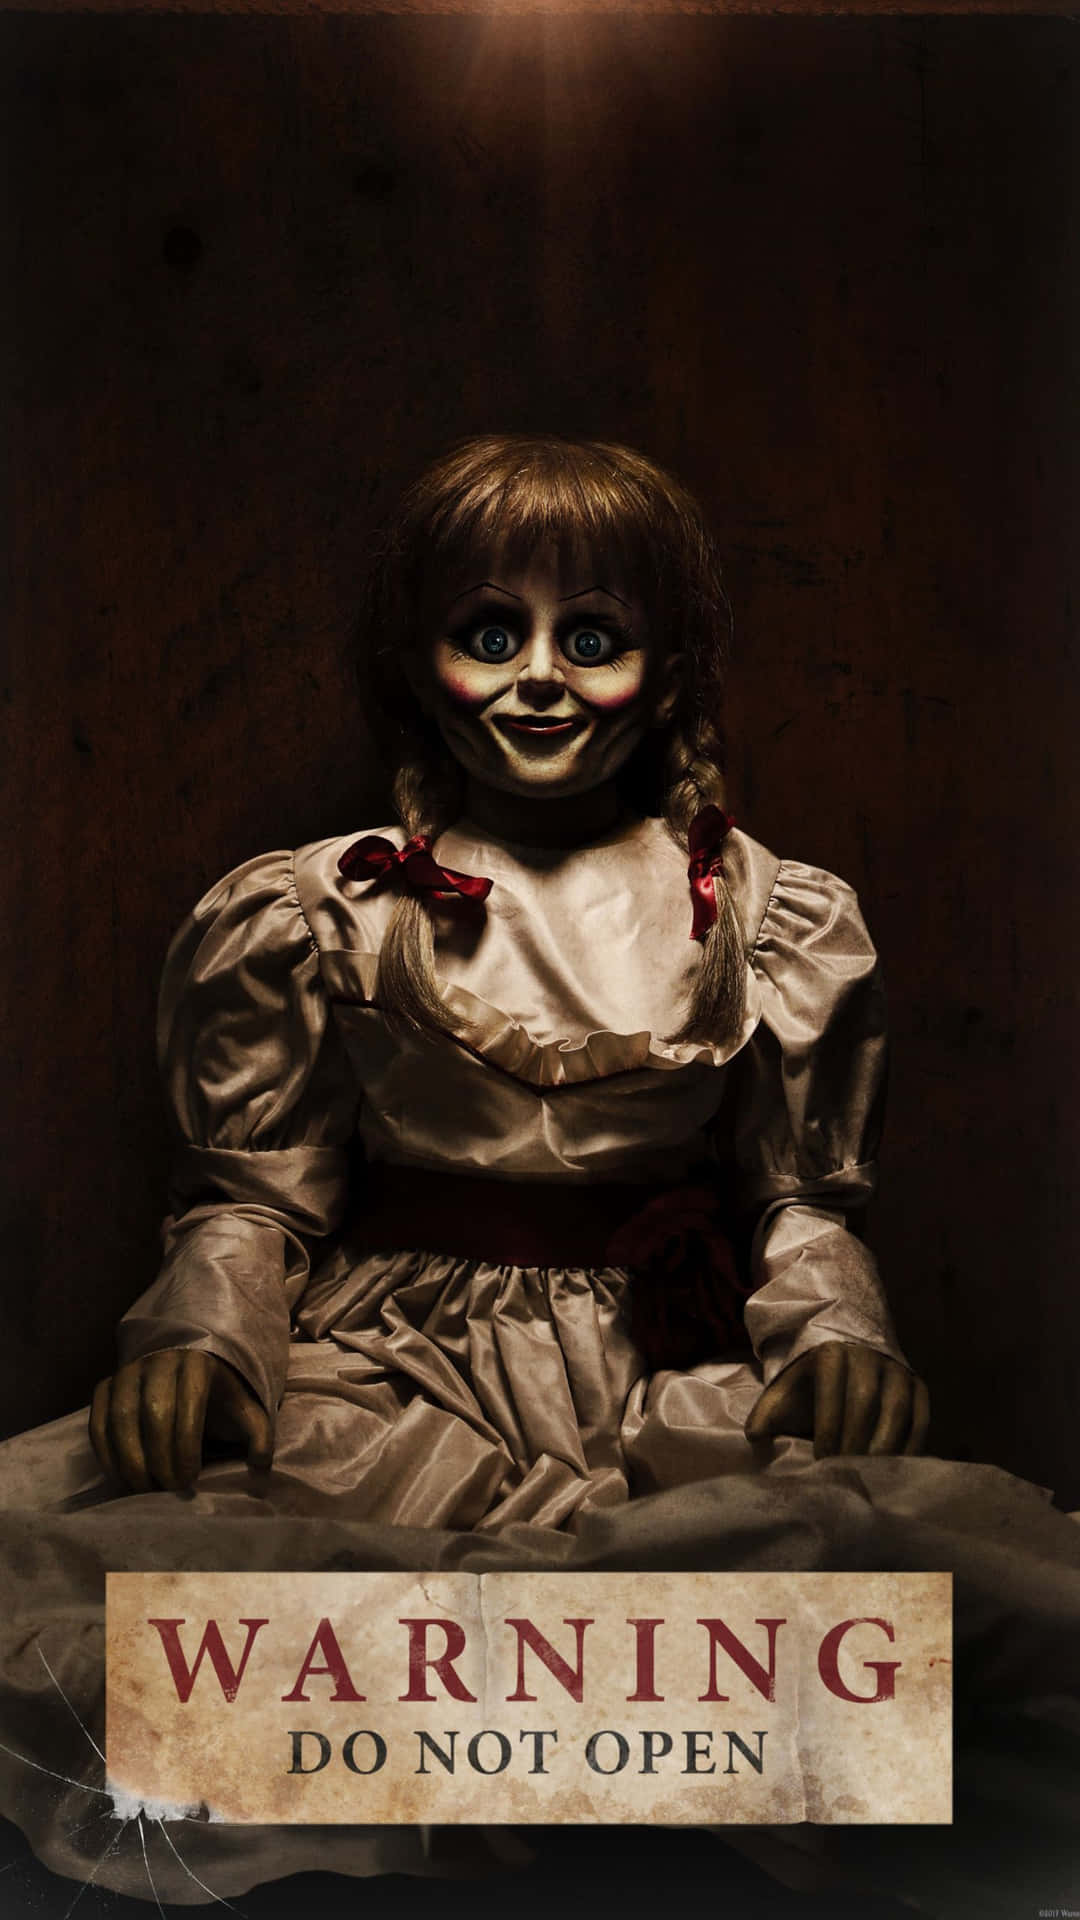 Annabelle, the demonic doll from James Wan's horror movie series.